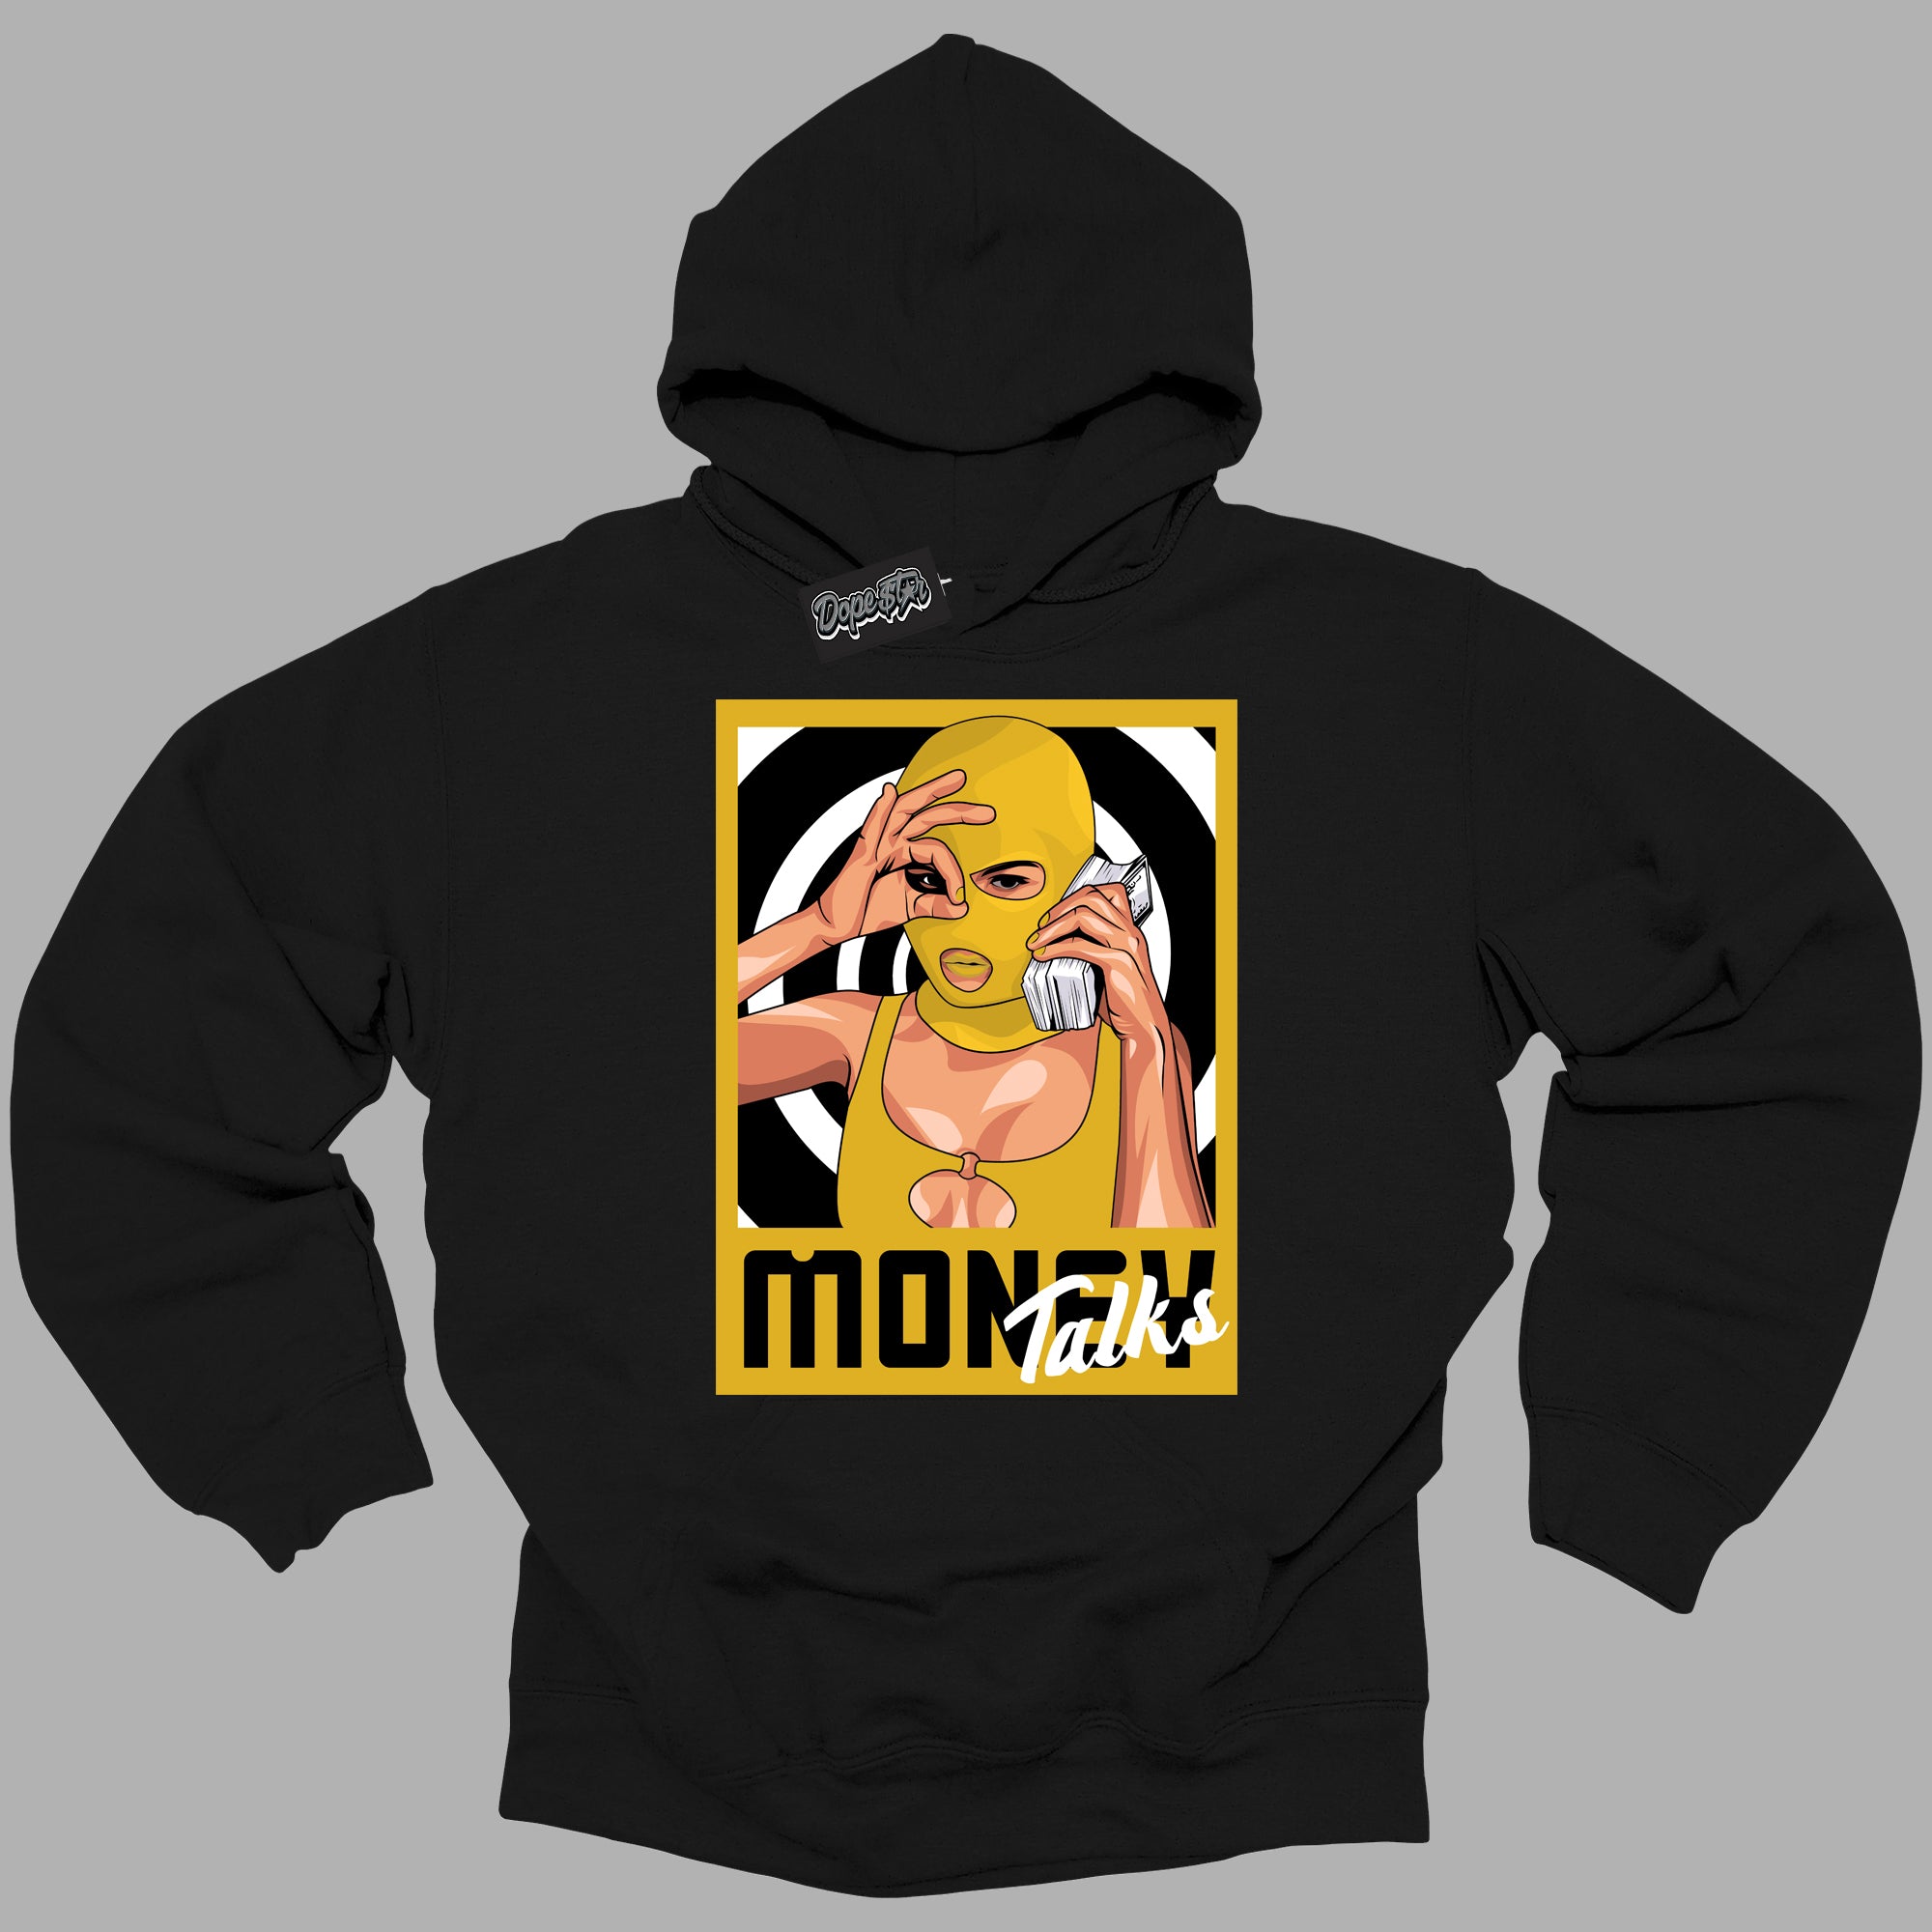 Cool Black Hoodie with “ Money Talks ”  design that Perfectly Matches Yellow Ochre 6s Sneakers.